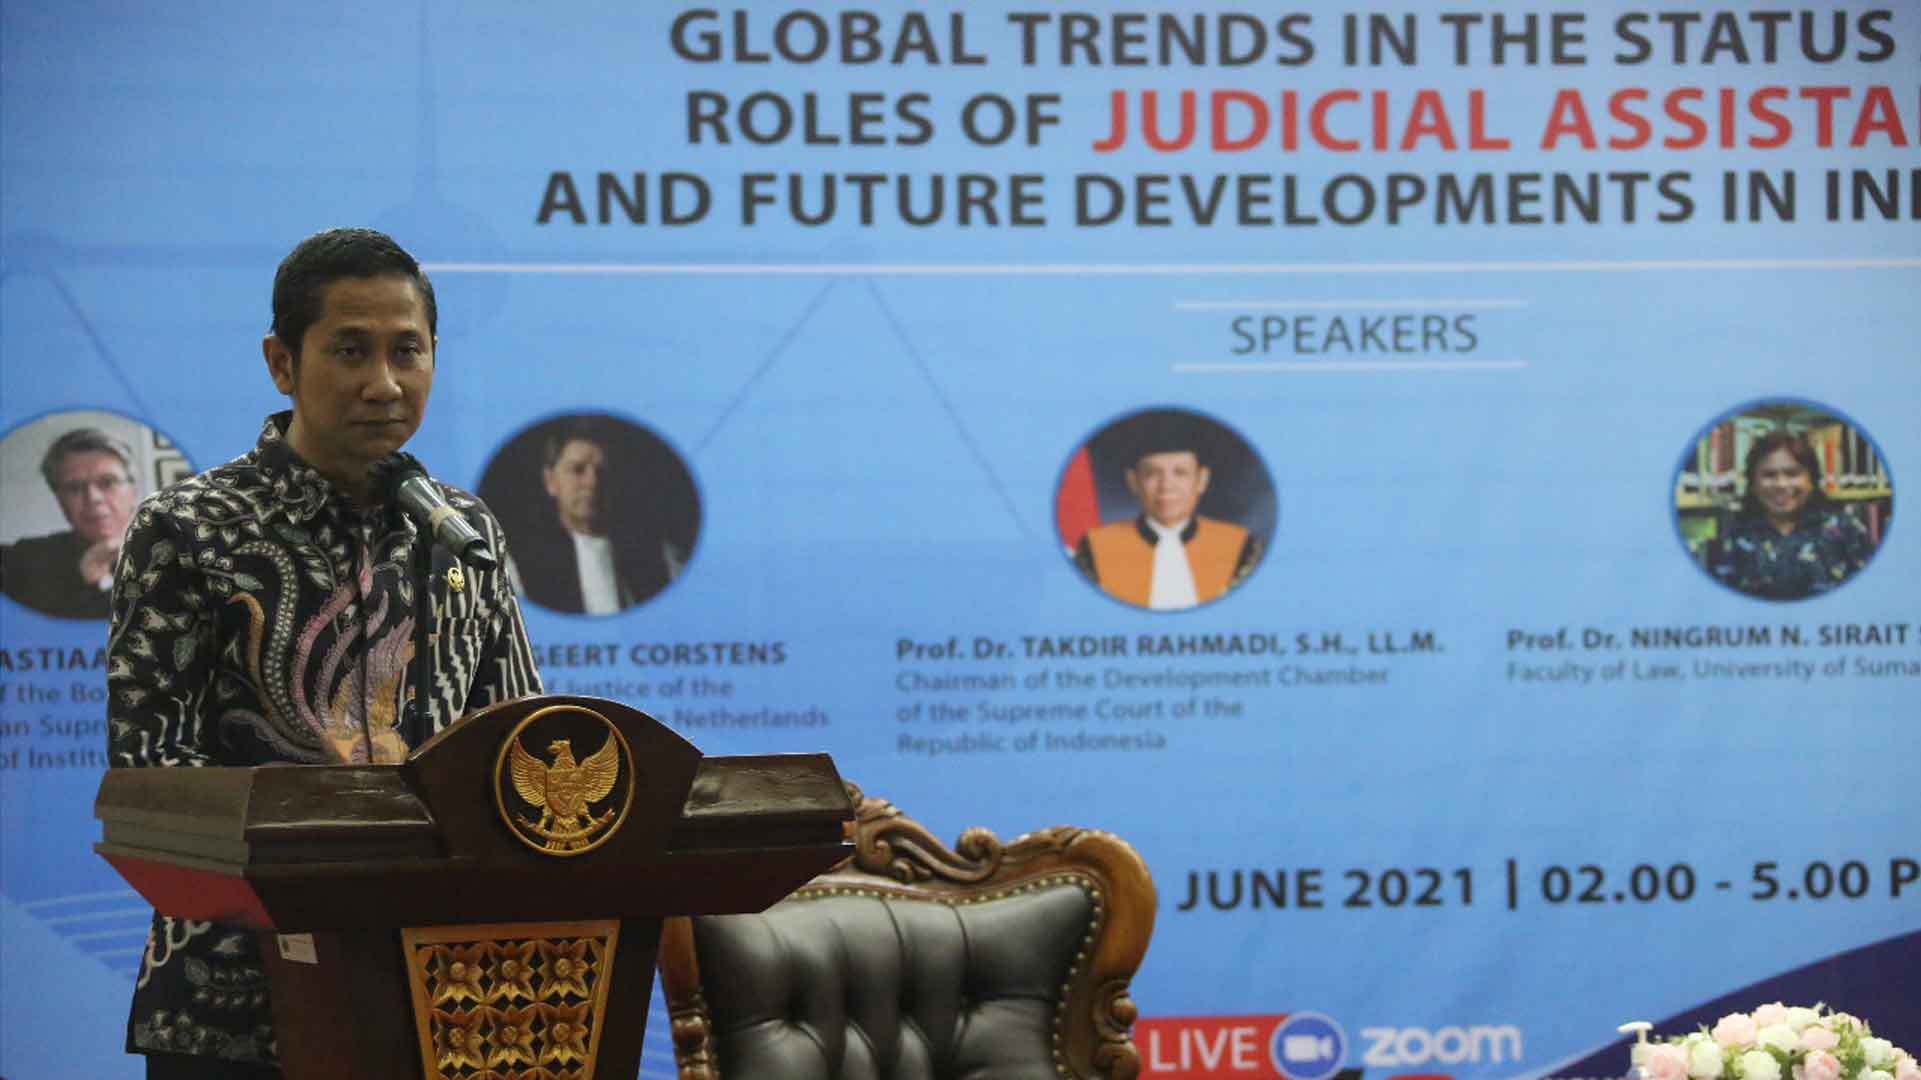 KY Gelar International Webinar “Global Trends In The Status and Roles of Judicial Assistans and Future Developments In Indonesia”